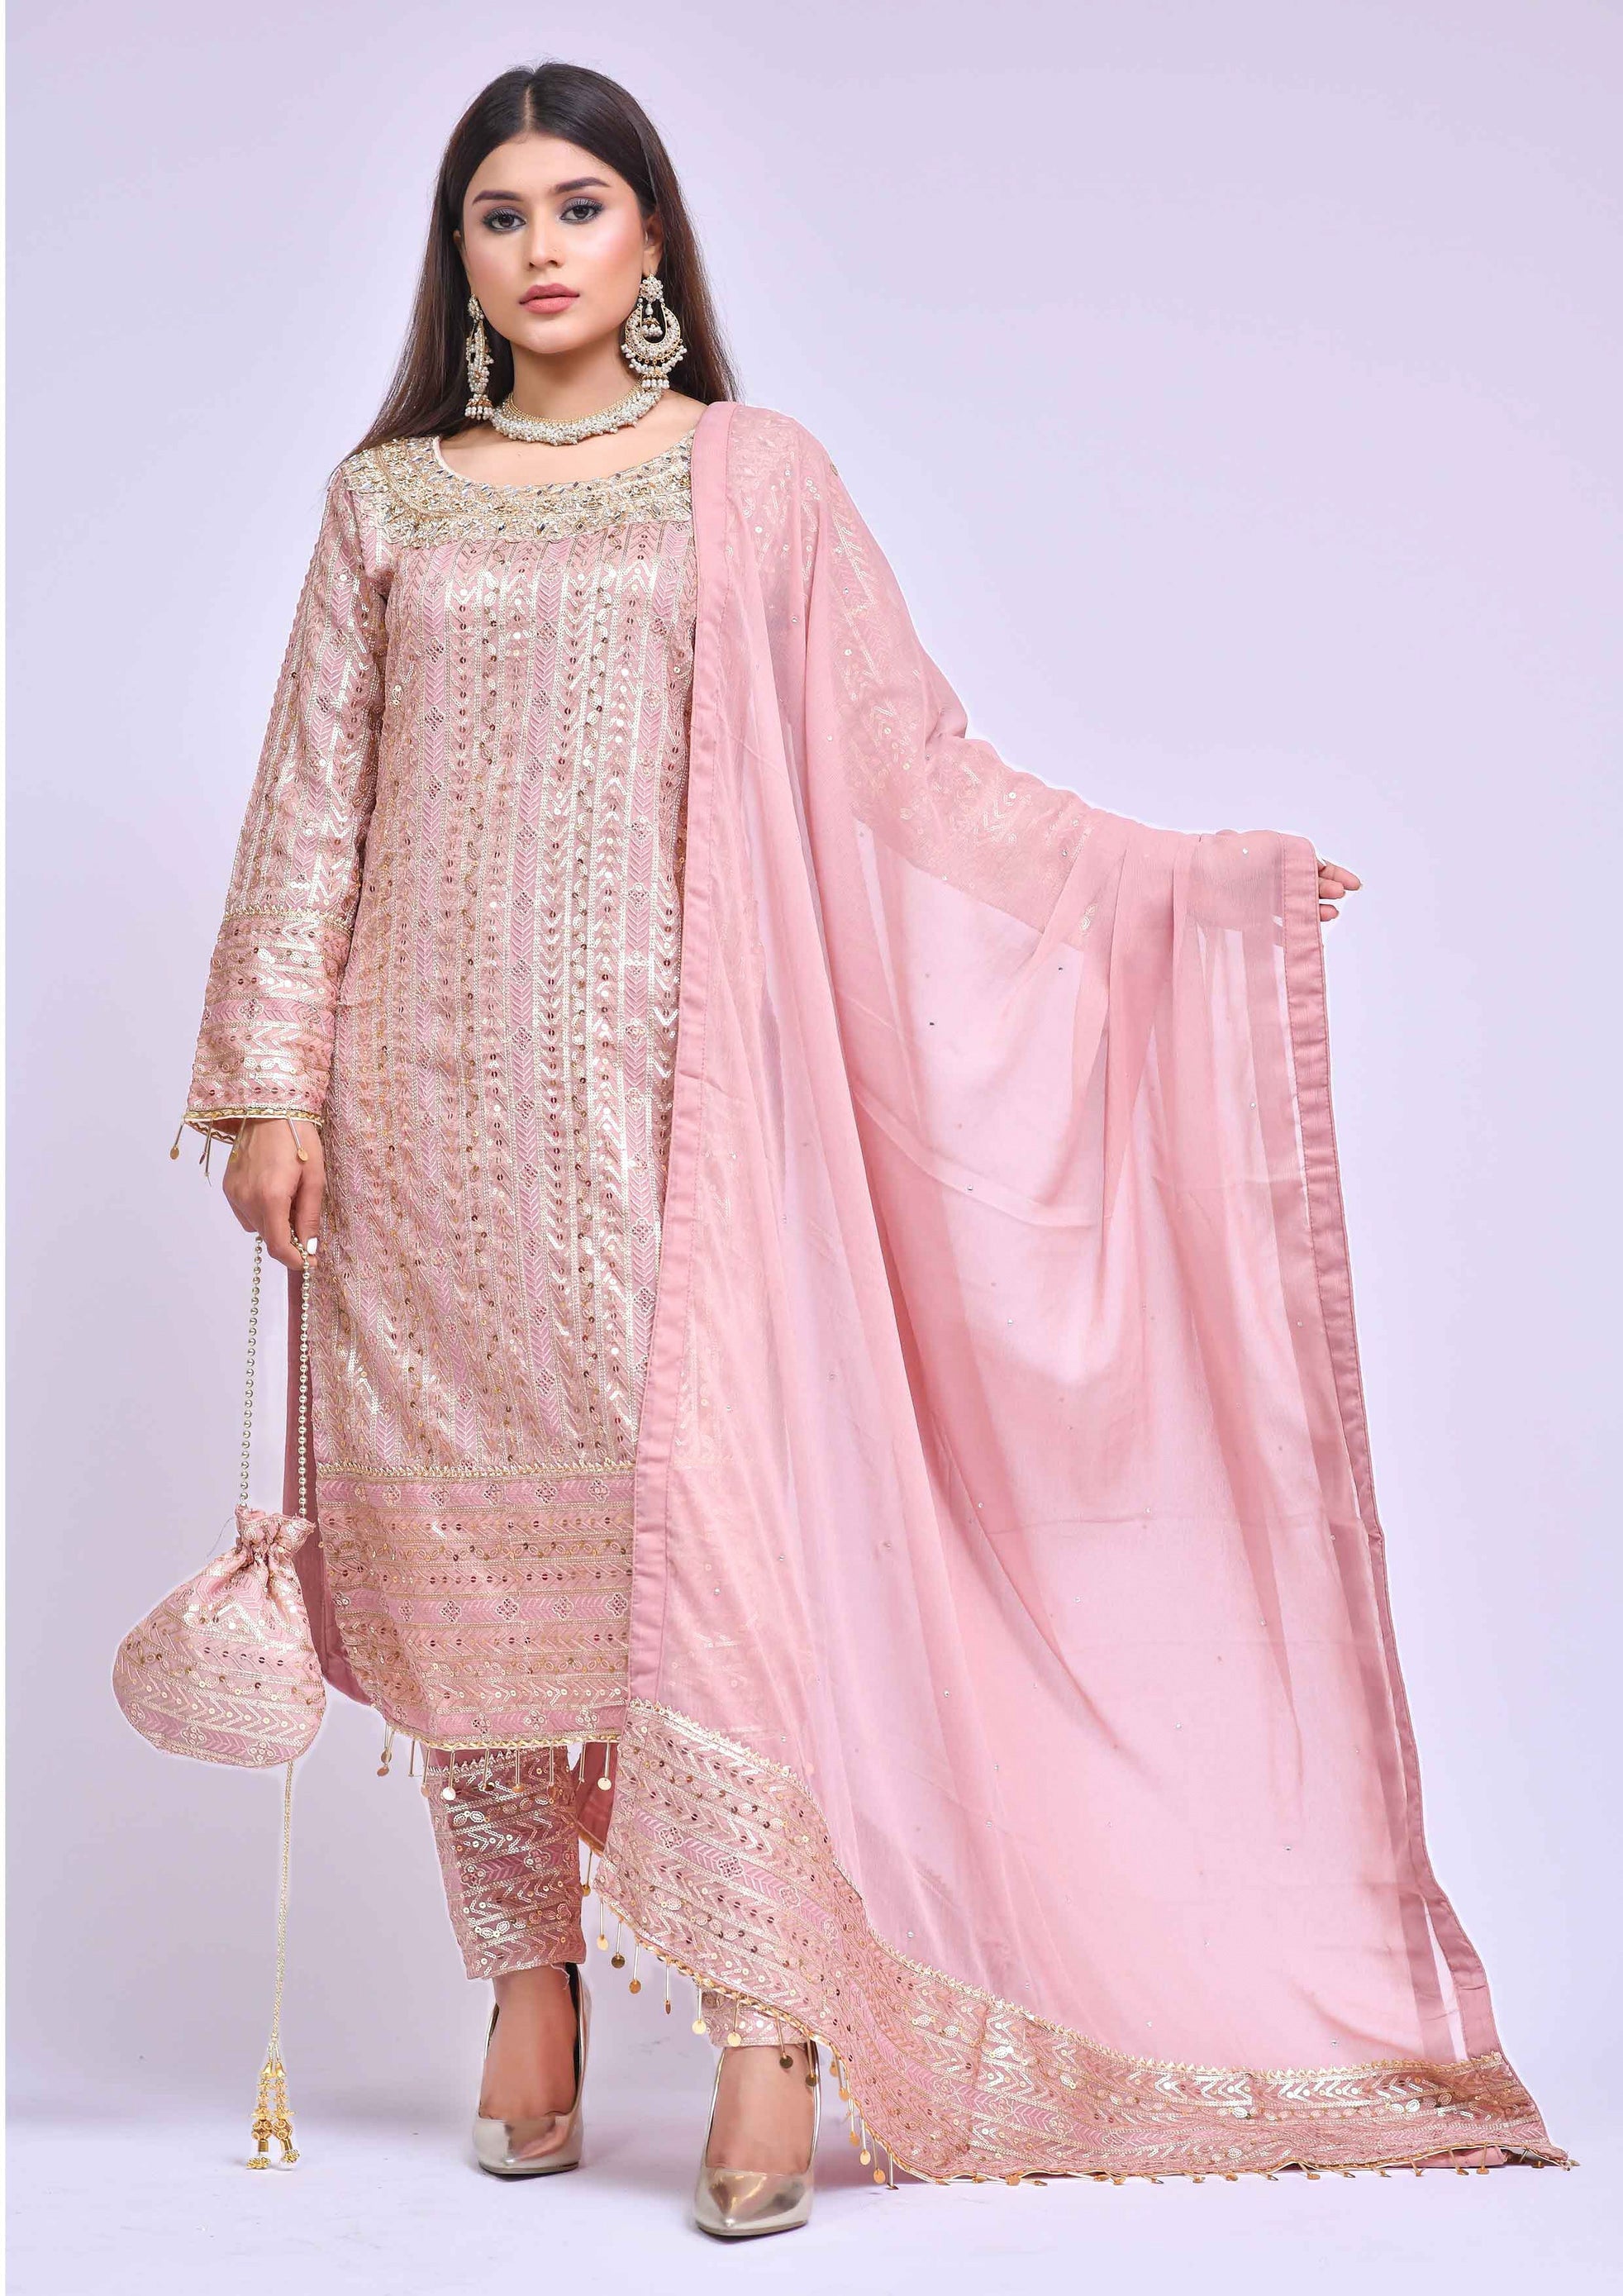 Ladies Designer Semi Formal Pink Heavy Embroidered Outfit - Desi Posh